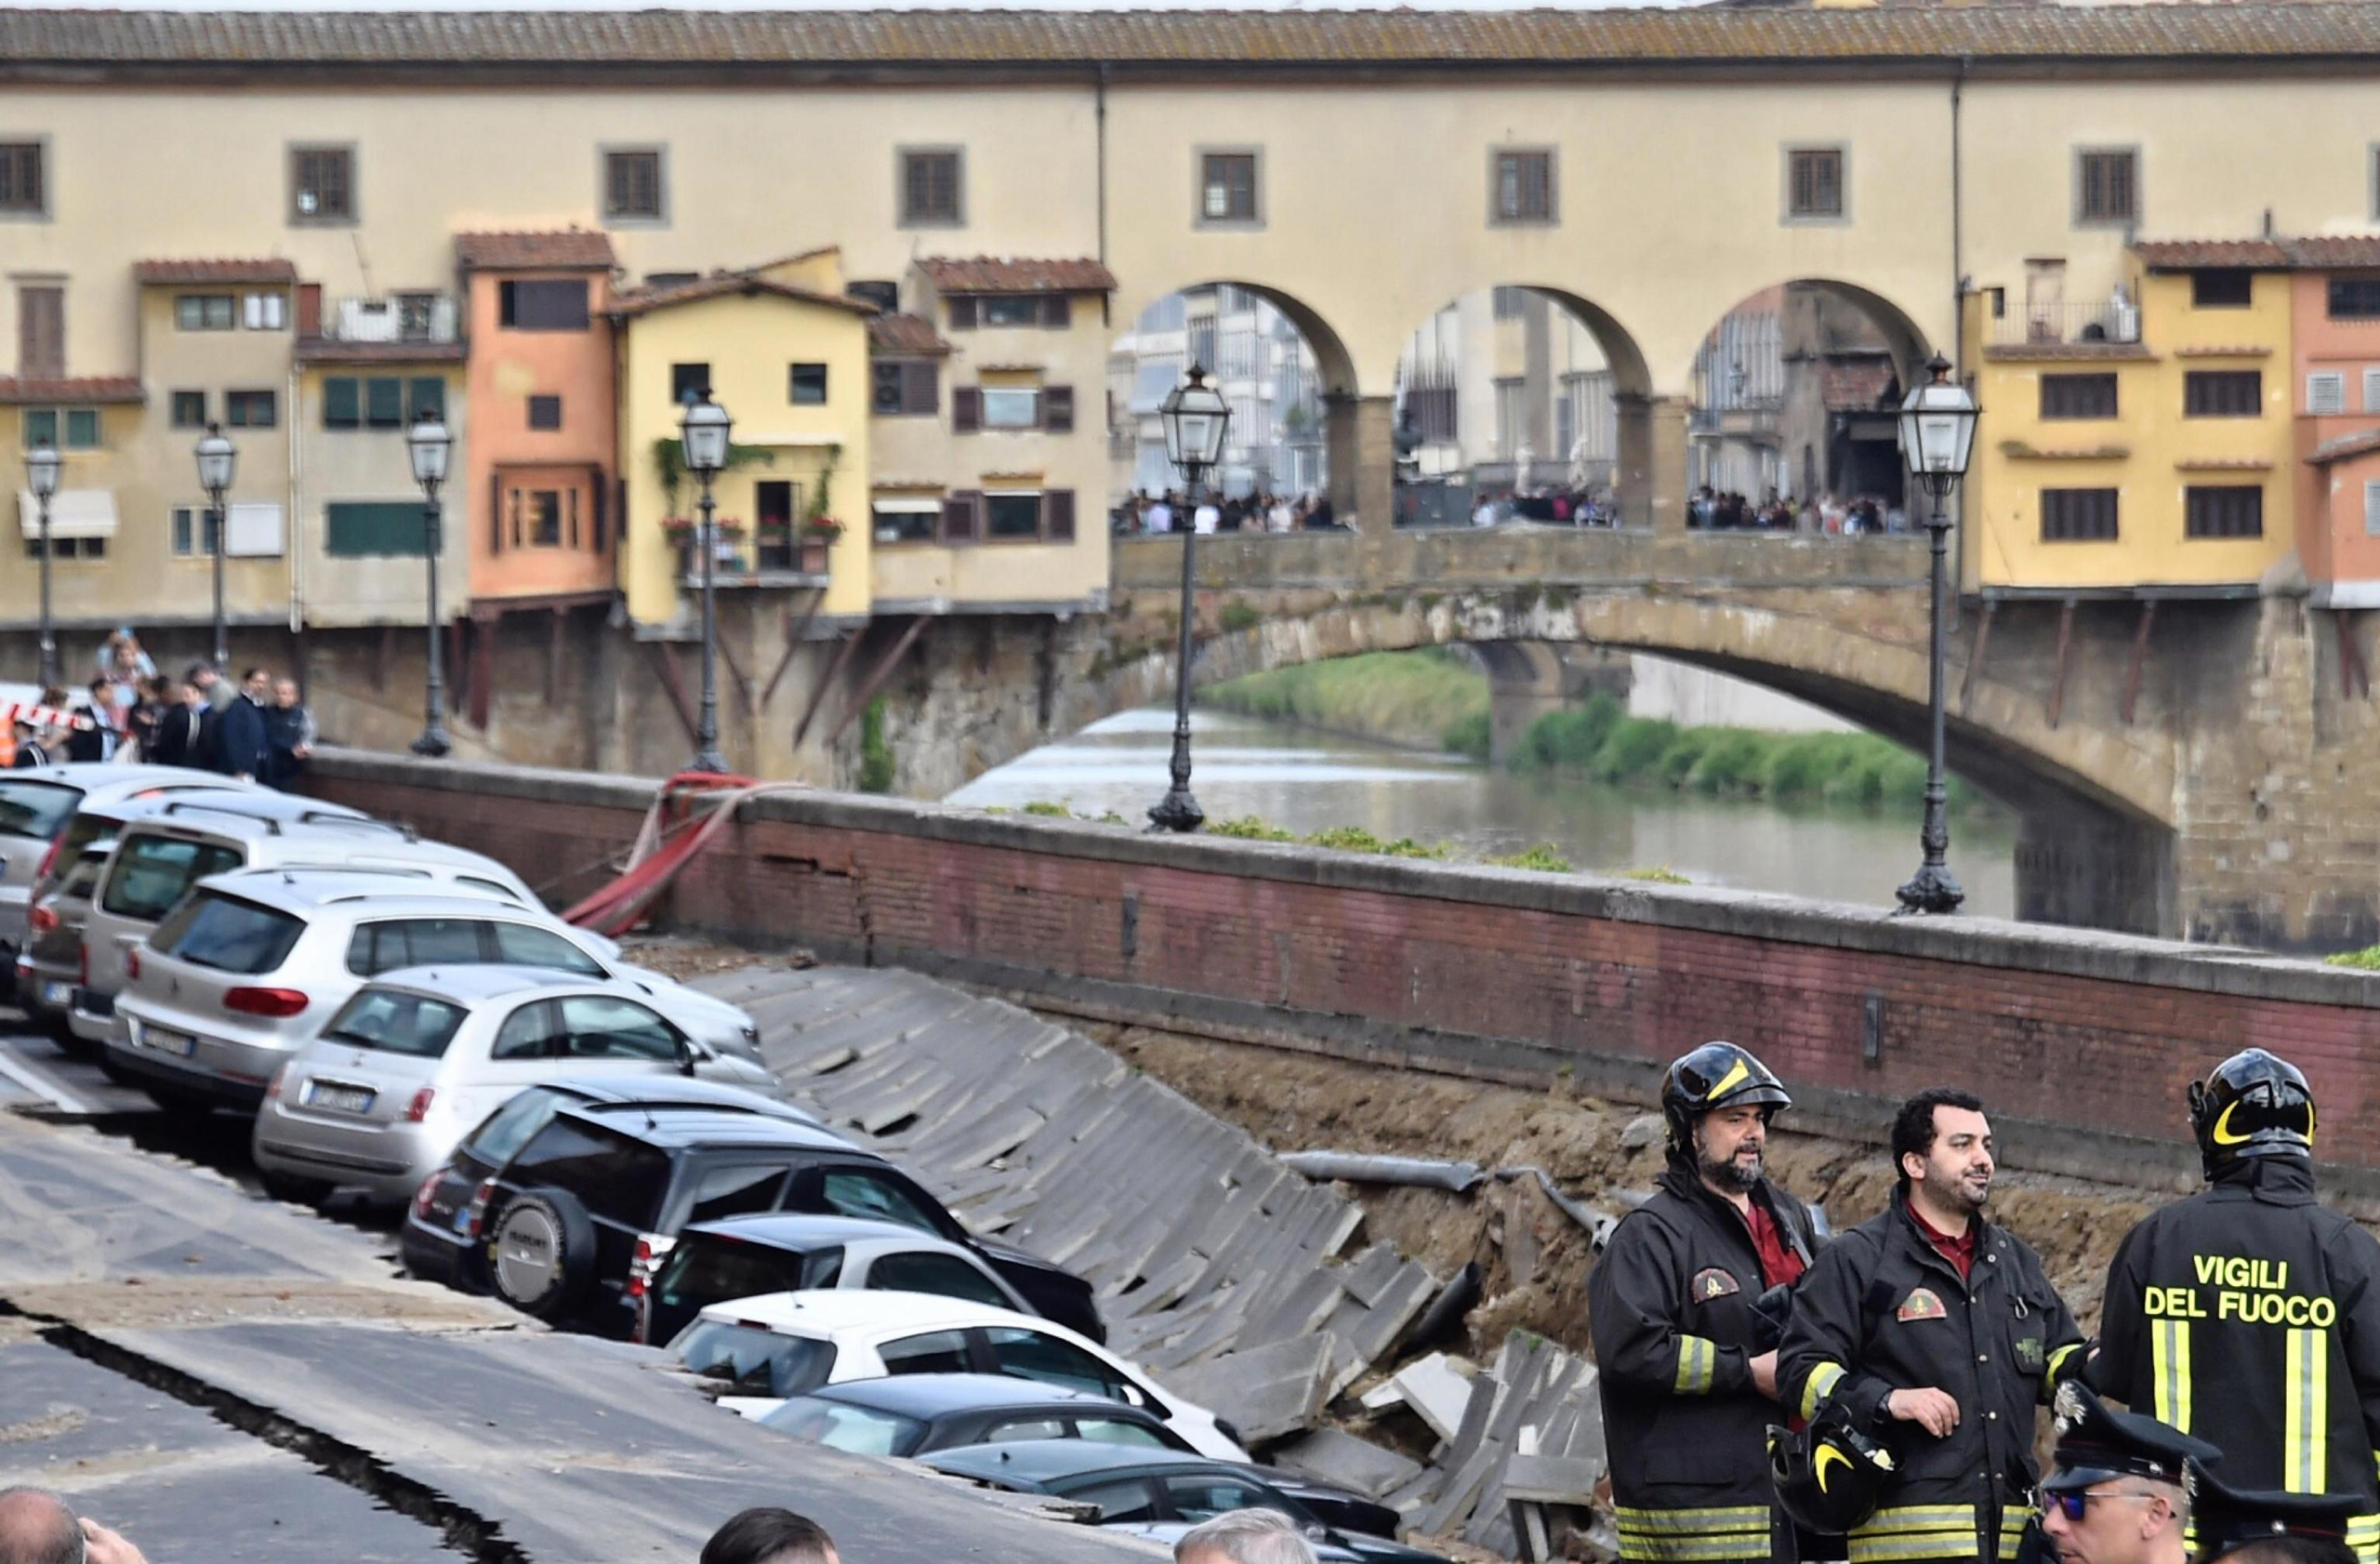 Firefighters standby by cars engulfed by a chasm which opened along Arno river near the Ponte Vecchio Old Bridge, seen in the background, in Florence, Italy, Wednesday,  May 25, 2016.  According to reports, the collapse occurred early in the morning and is caused by the rupture of an acqueduct. (Maurizio degl'Innocenti/ANSA via AP)